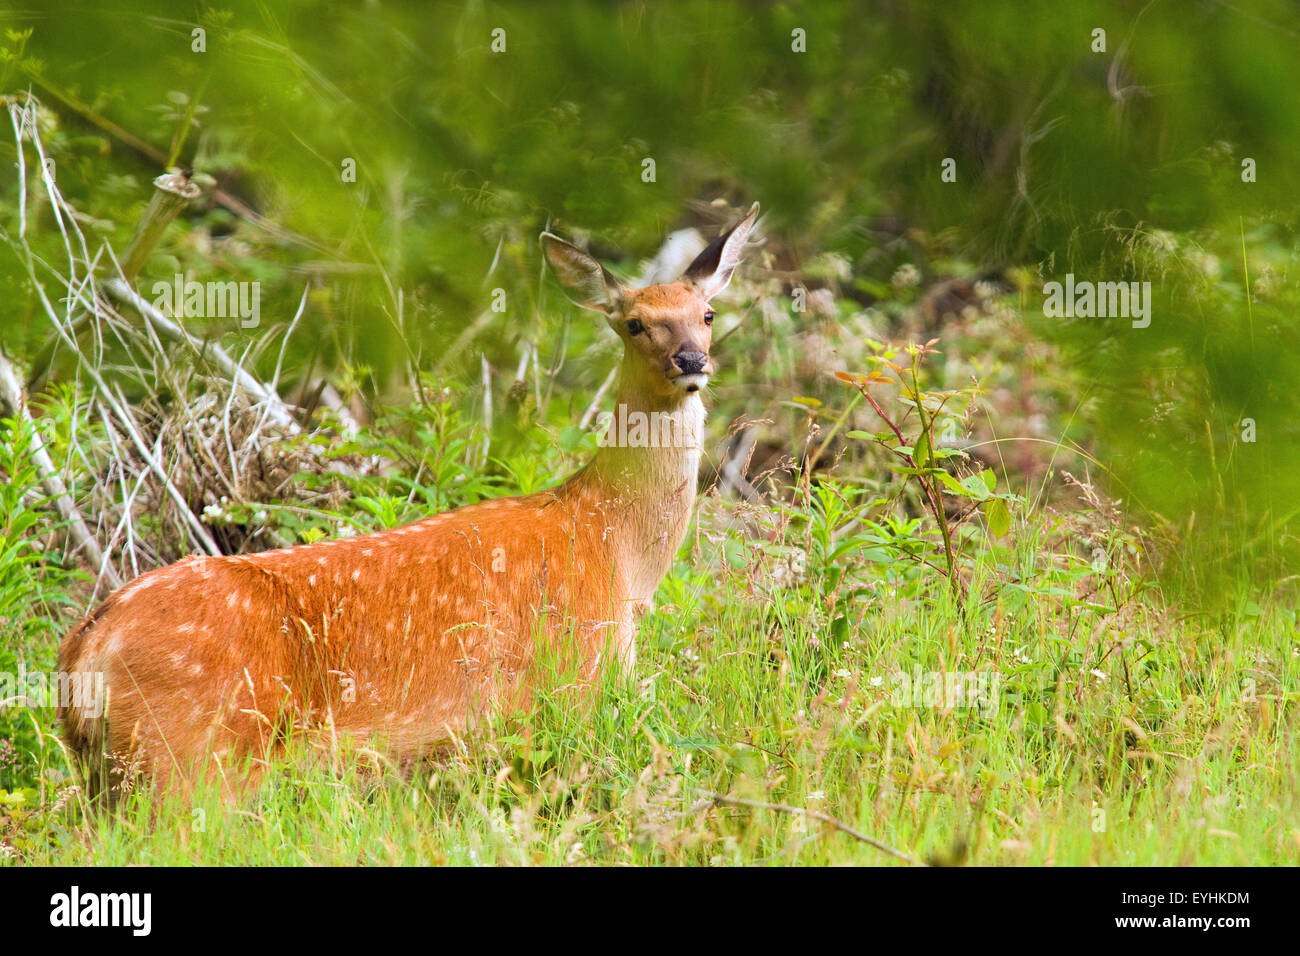 Deer in the Mountain Forest Clearing Stock Photo